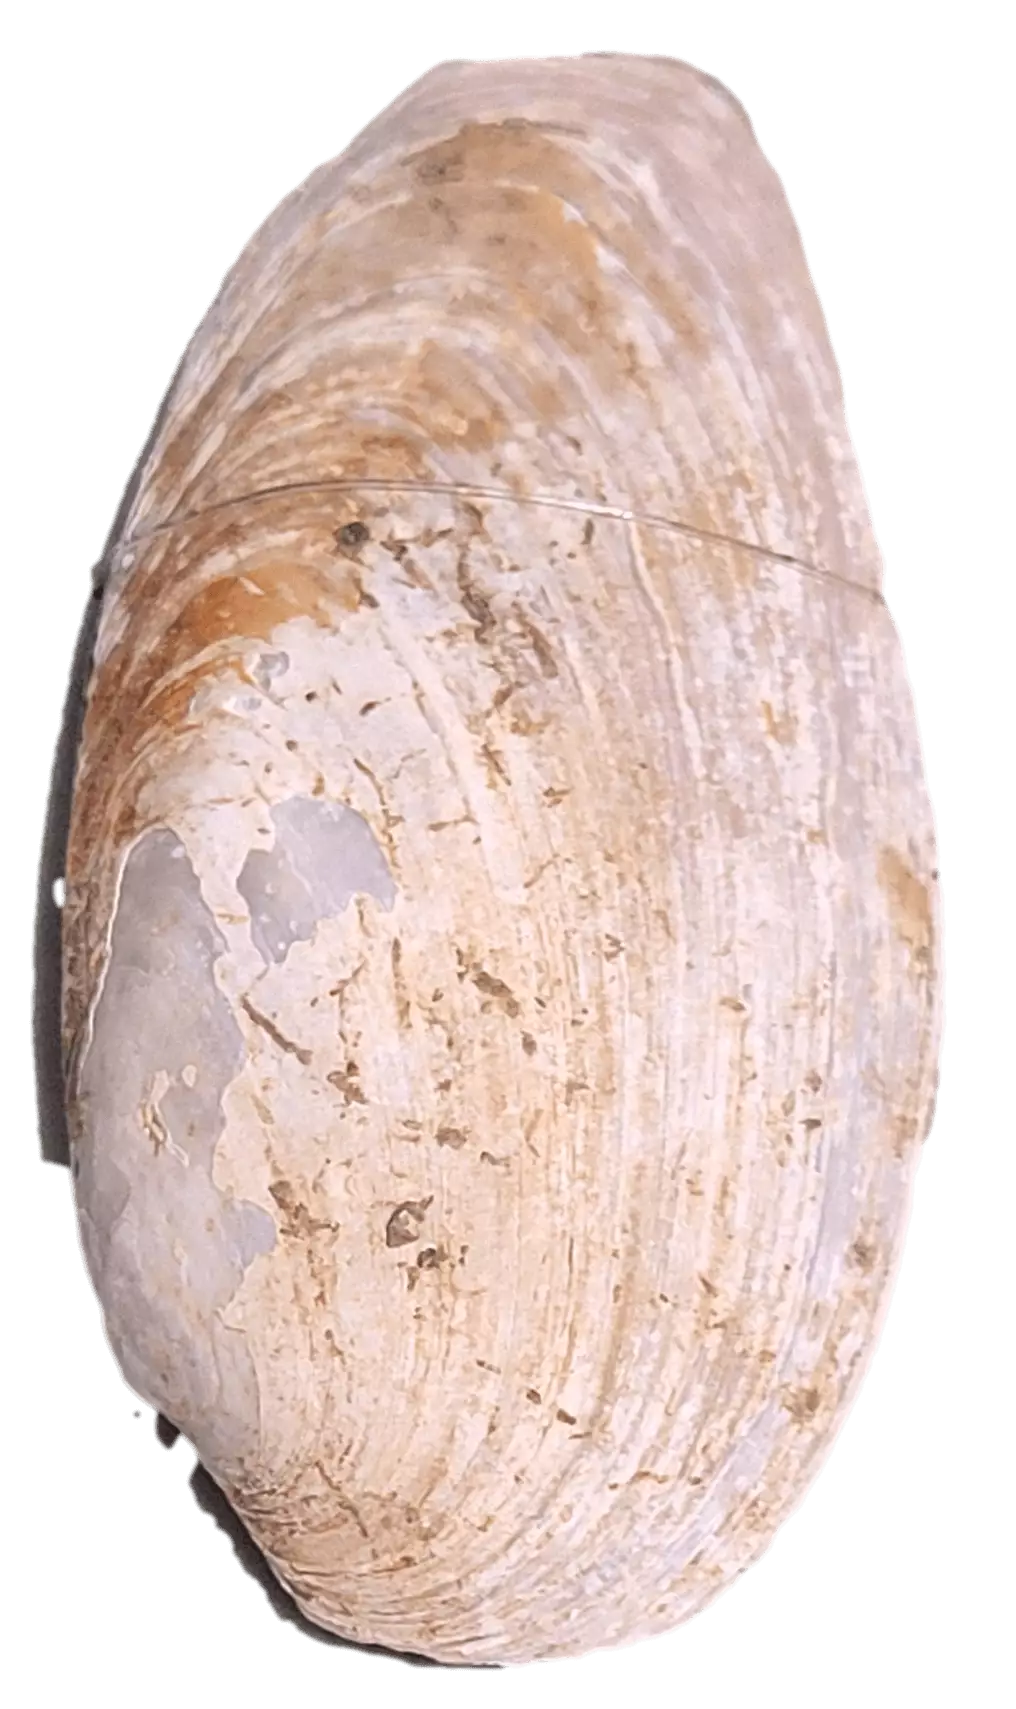 Image of a mussel shell, which is thin and flaky, white and beige, and oval shaped.